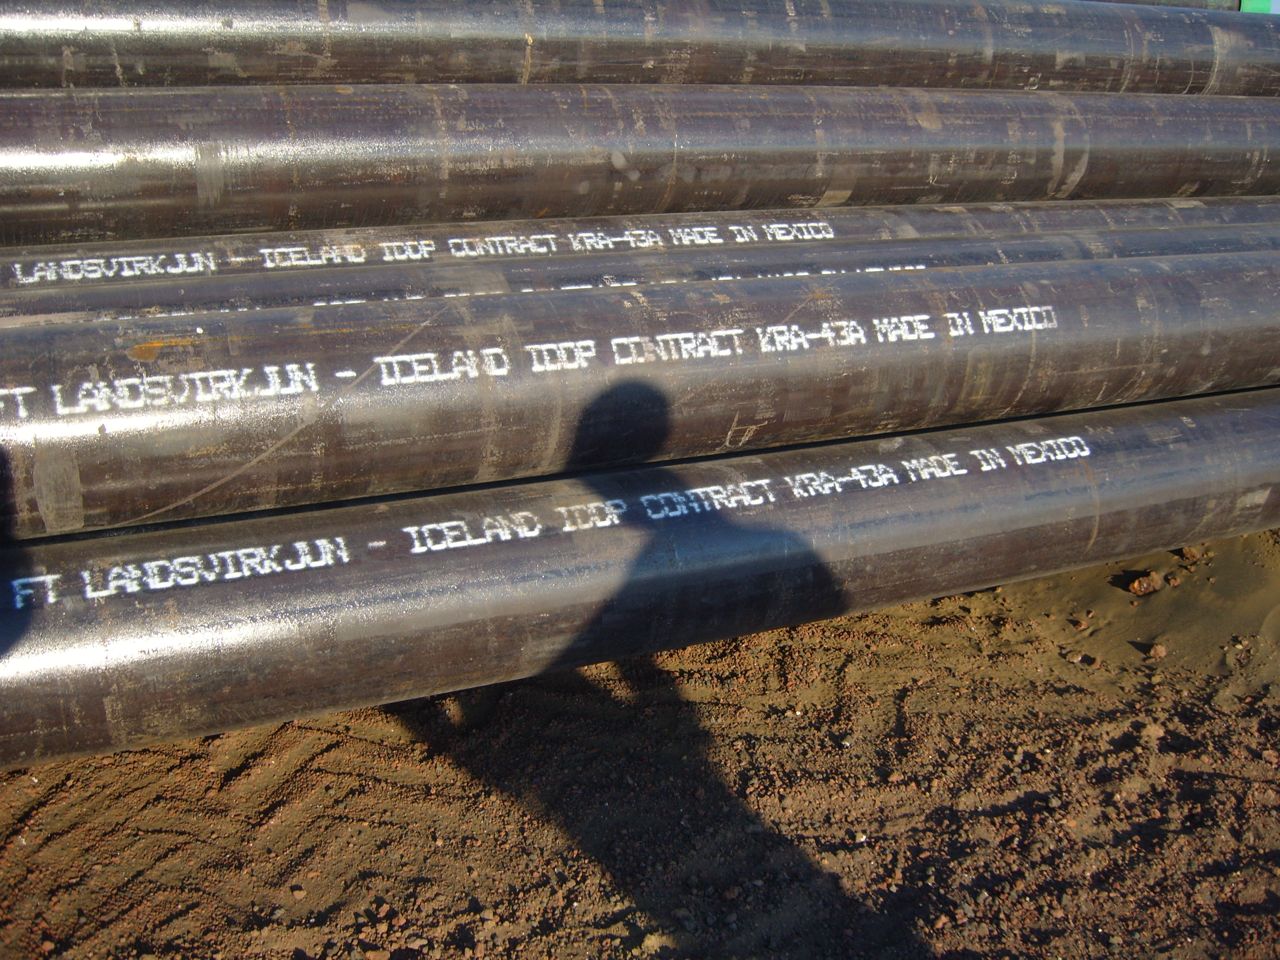 Pipes for new drill site.